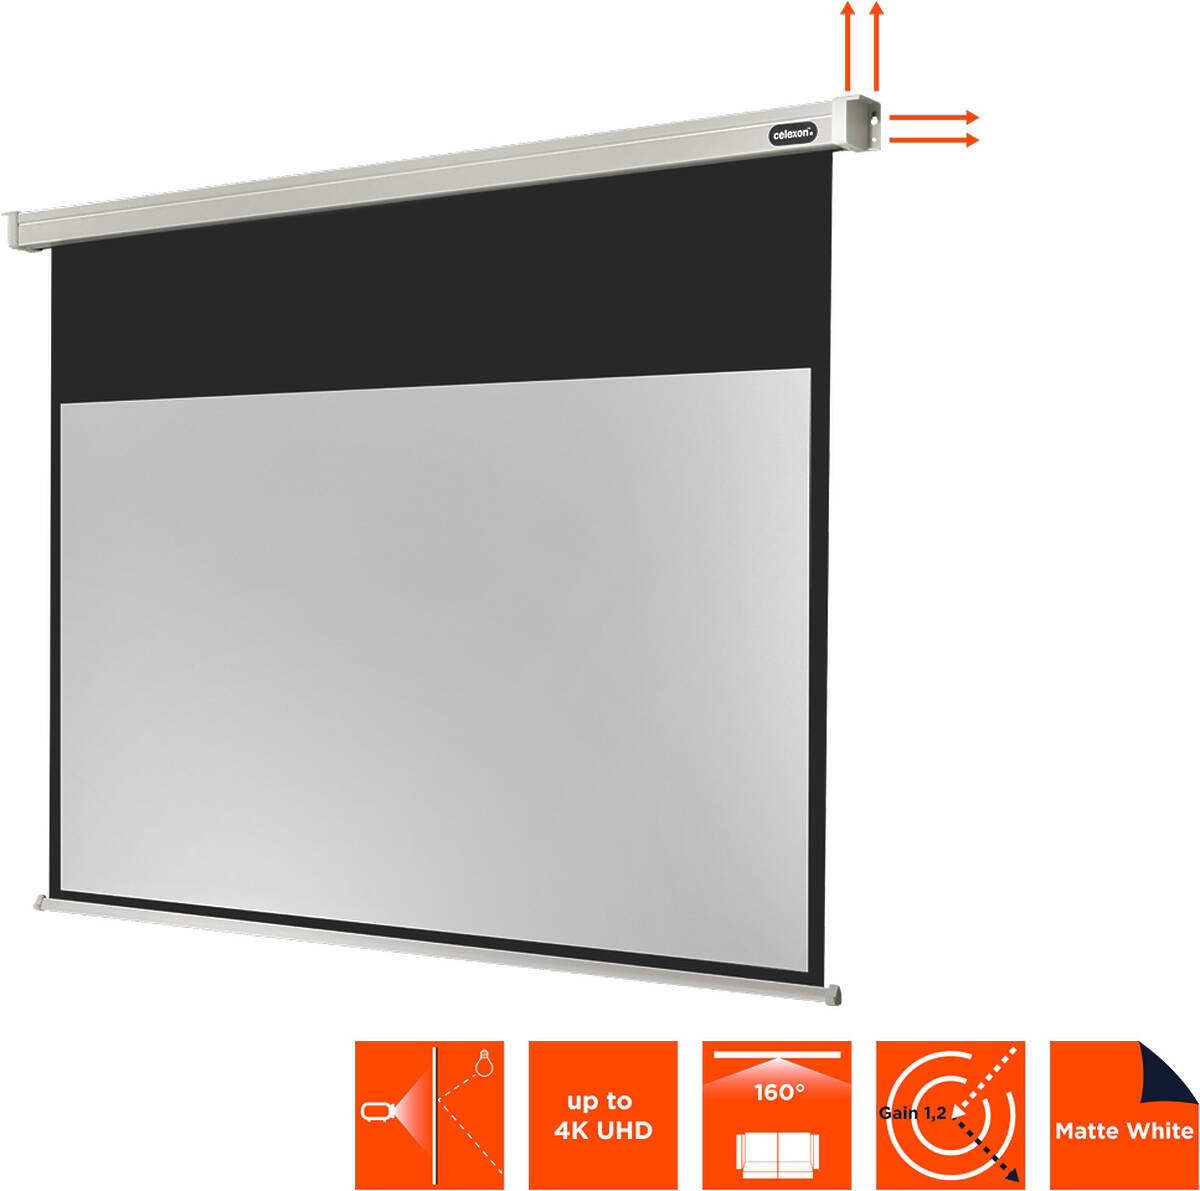 Celexon EP/210X118 95" (2.41m)
 16:9 aspect ratio projection screen product image. Click to enlarge.